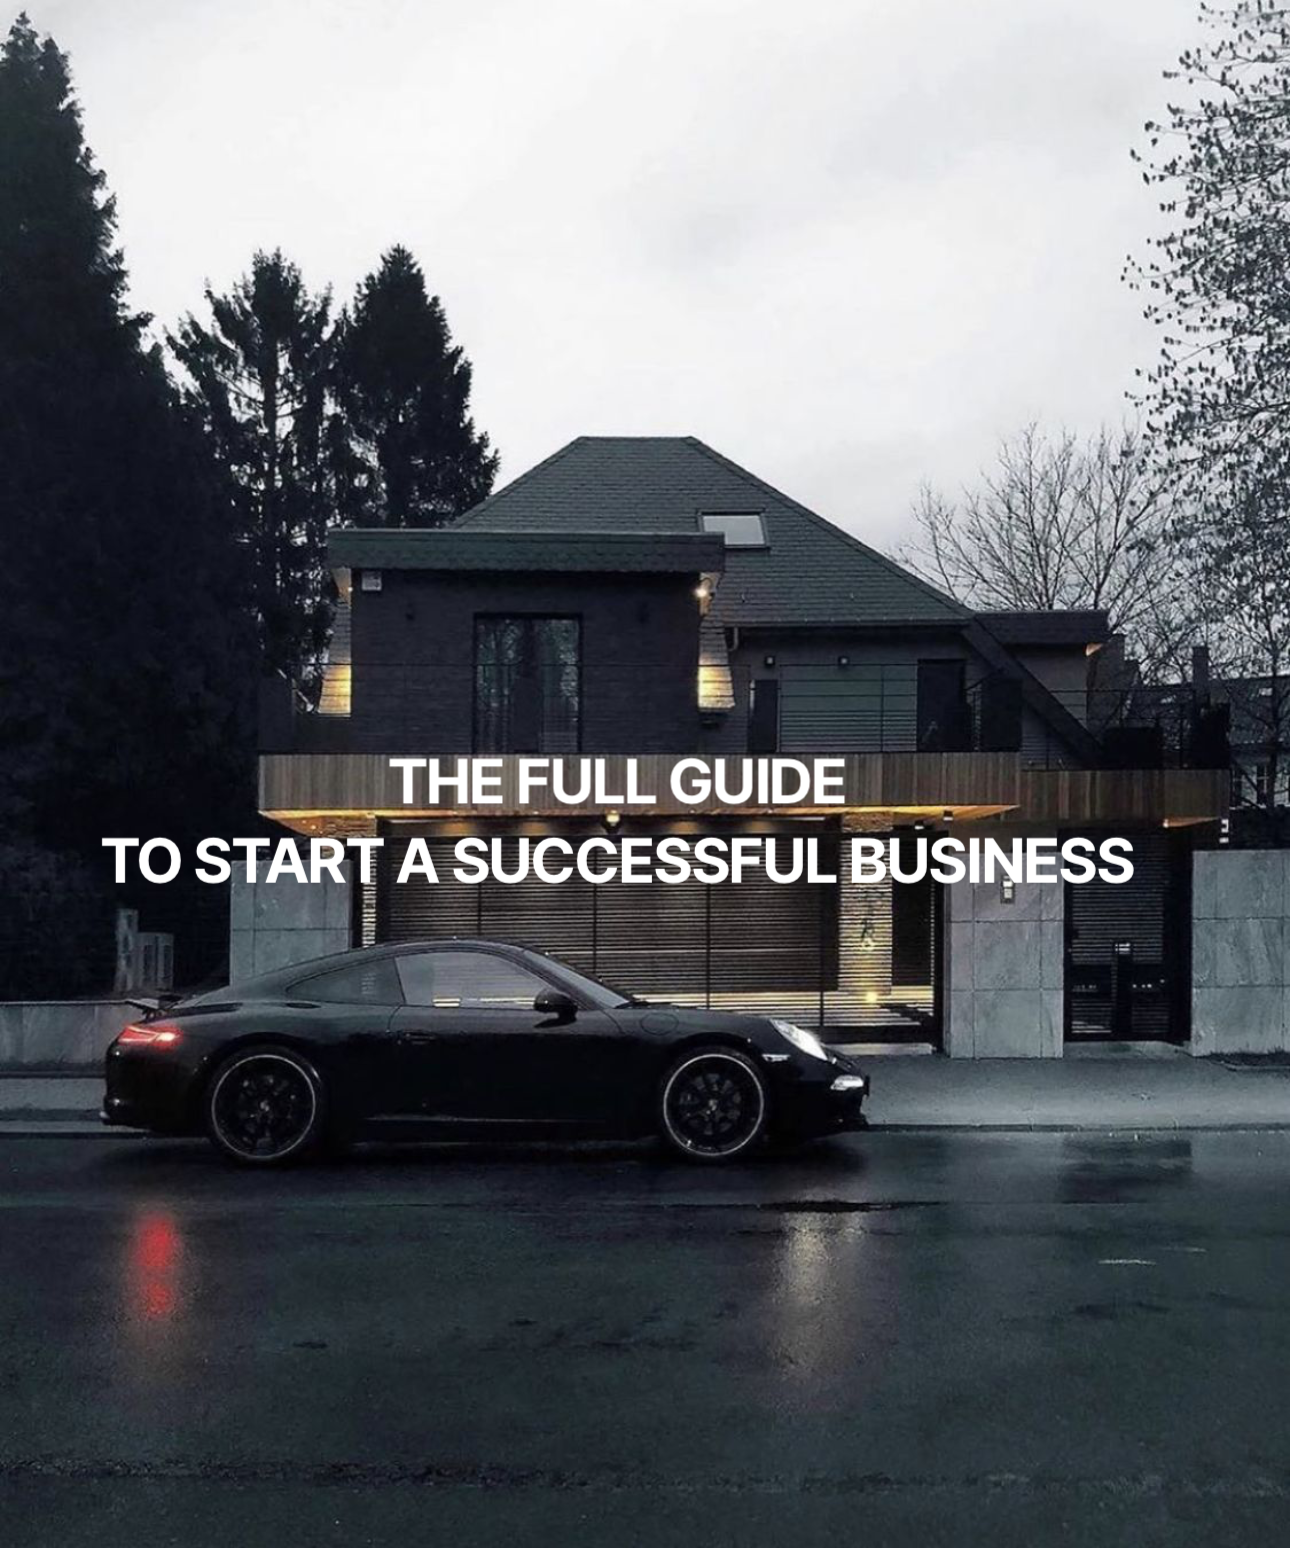 THE COMPLETE GUIDE TO START A SUCCESSFUL BUSINESS ONLINE